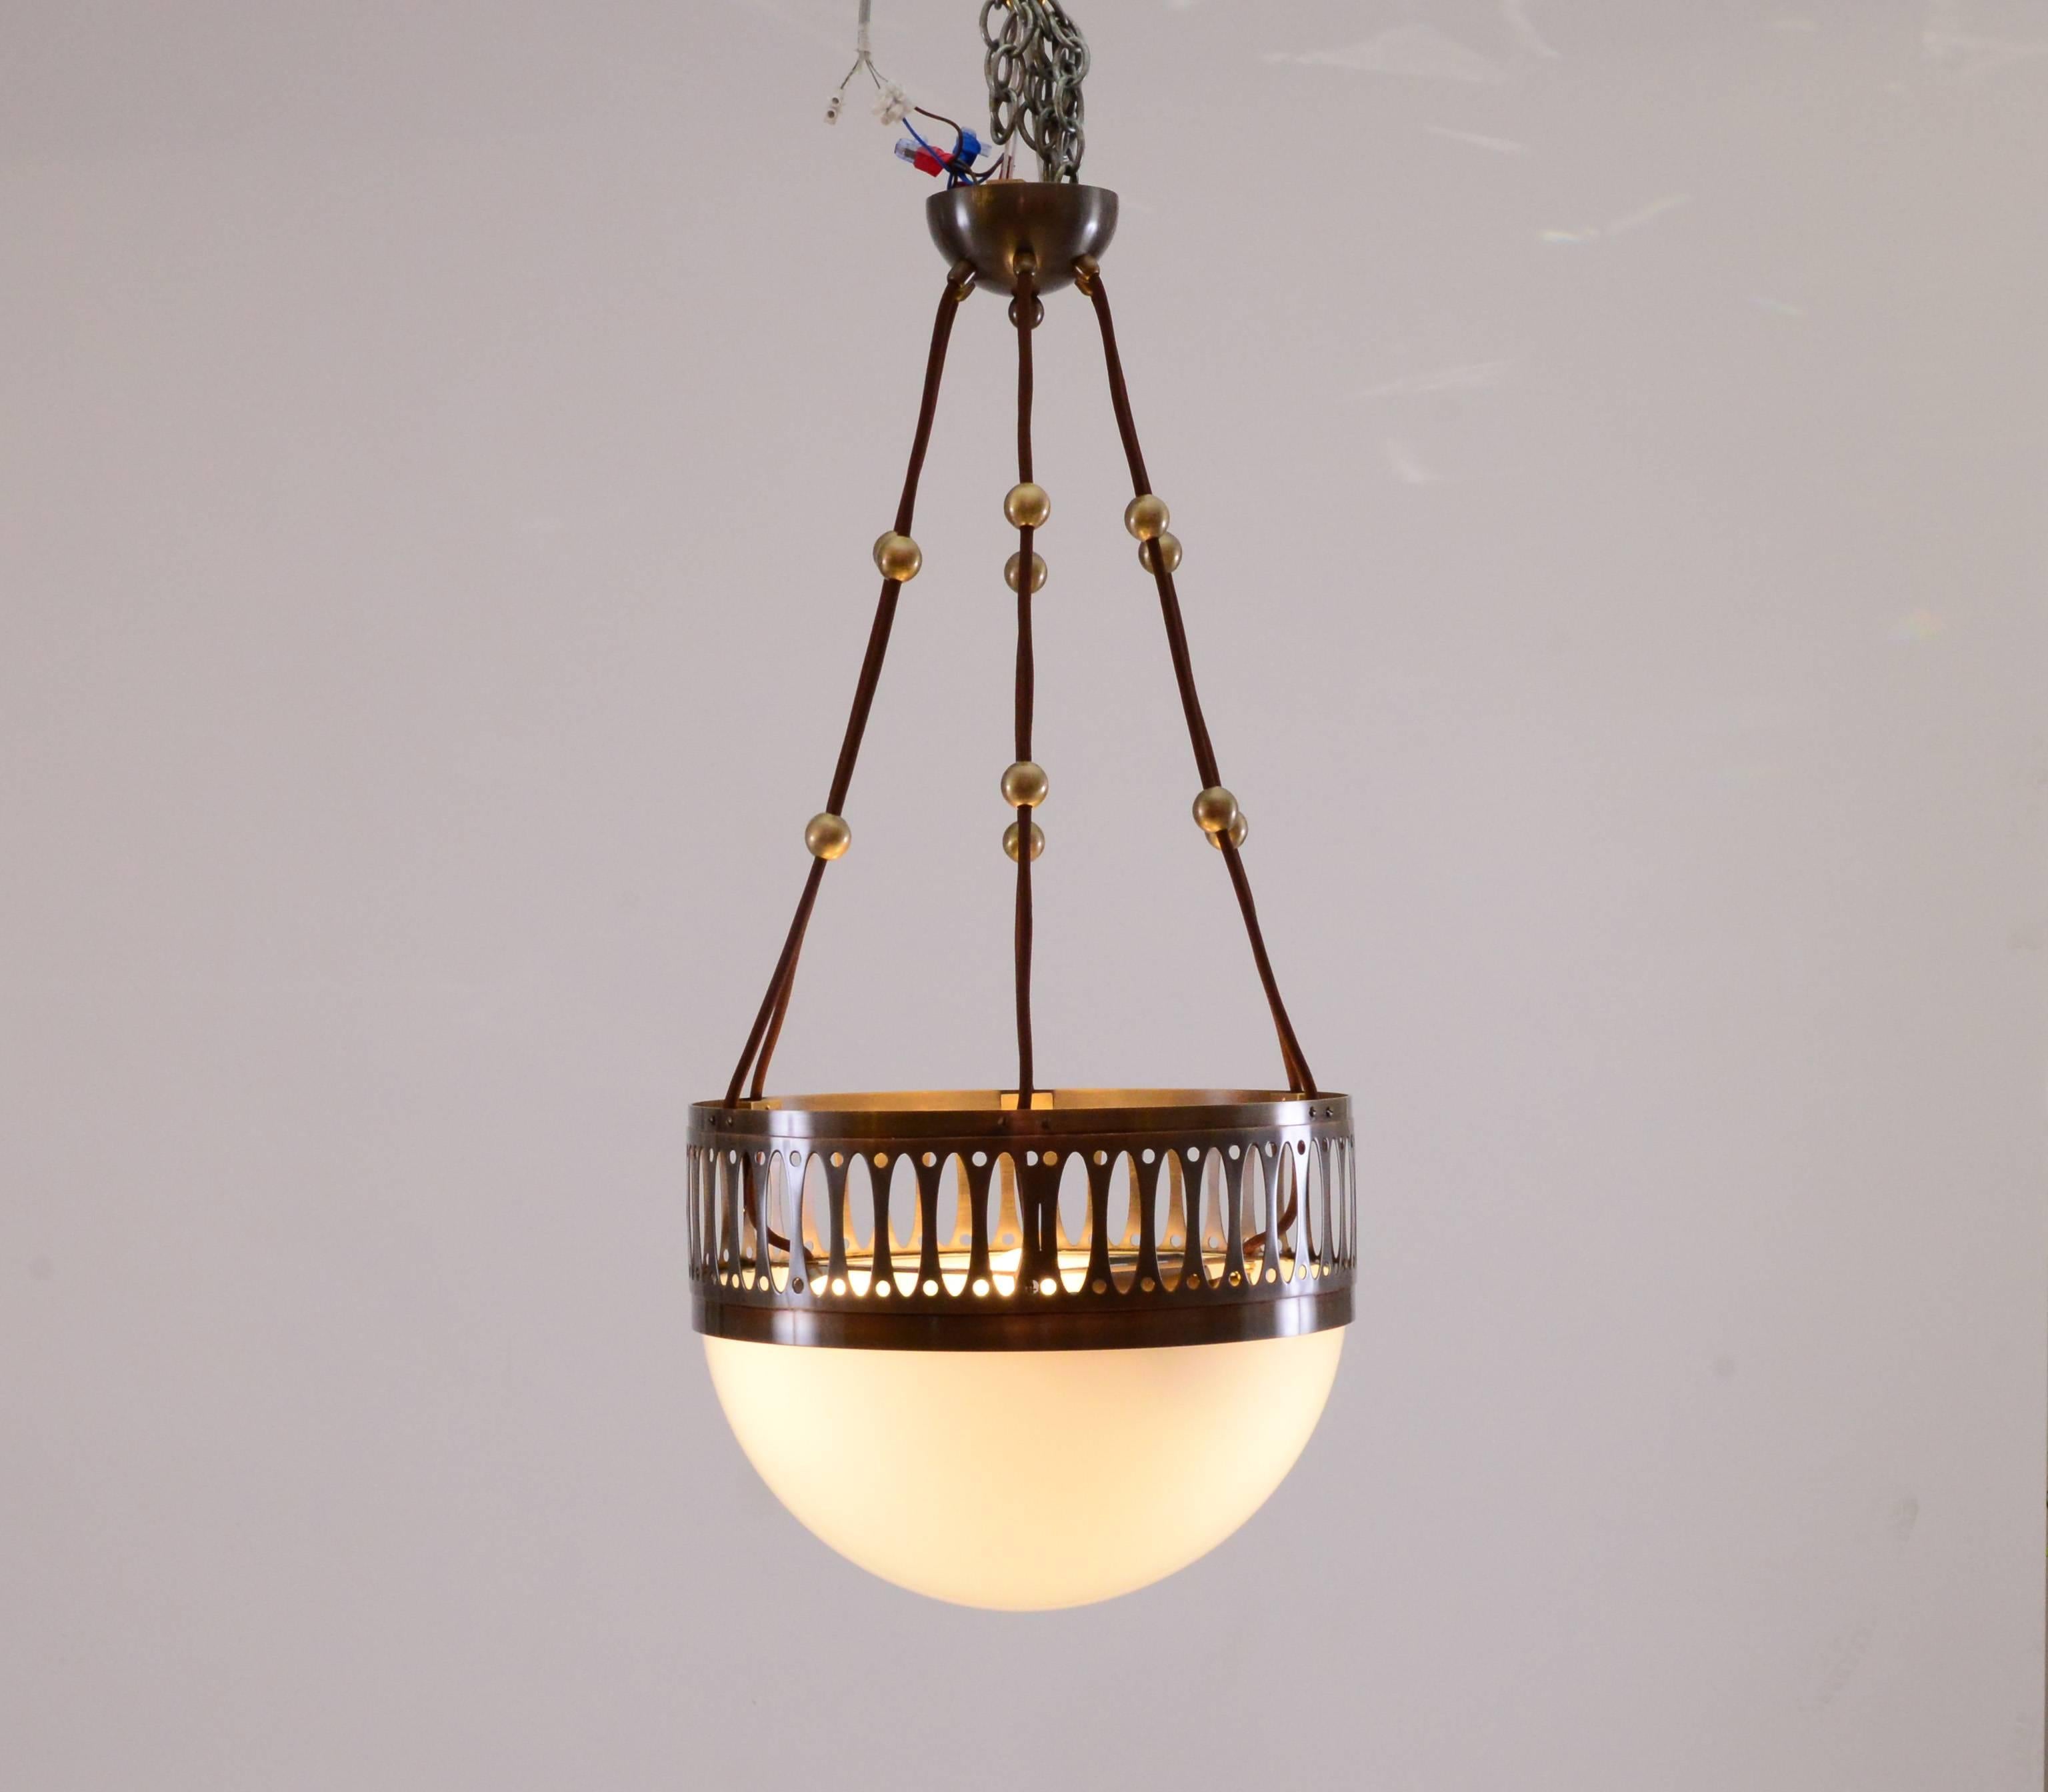 Very elegant chandelier, pictured is a patinated-Version (DM 35cm), also available with a bigger diameter.
Total drop can be custom made.
All components according to the UL regulations, with an additional charge we will UL-list and label our